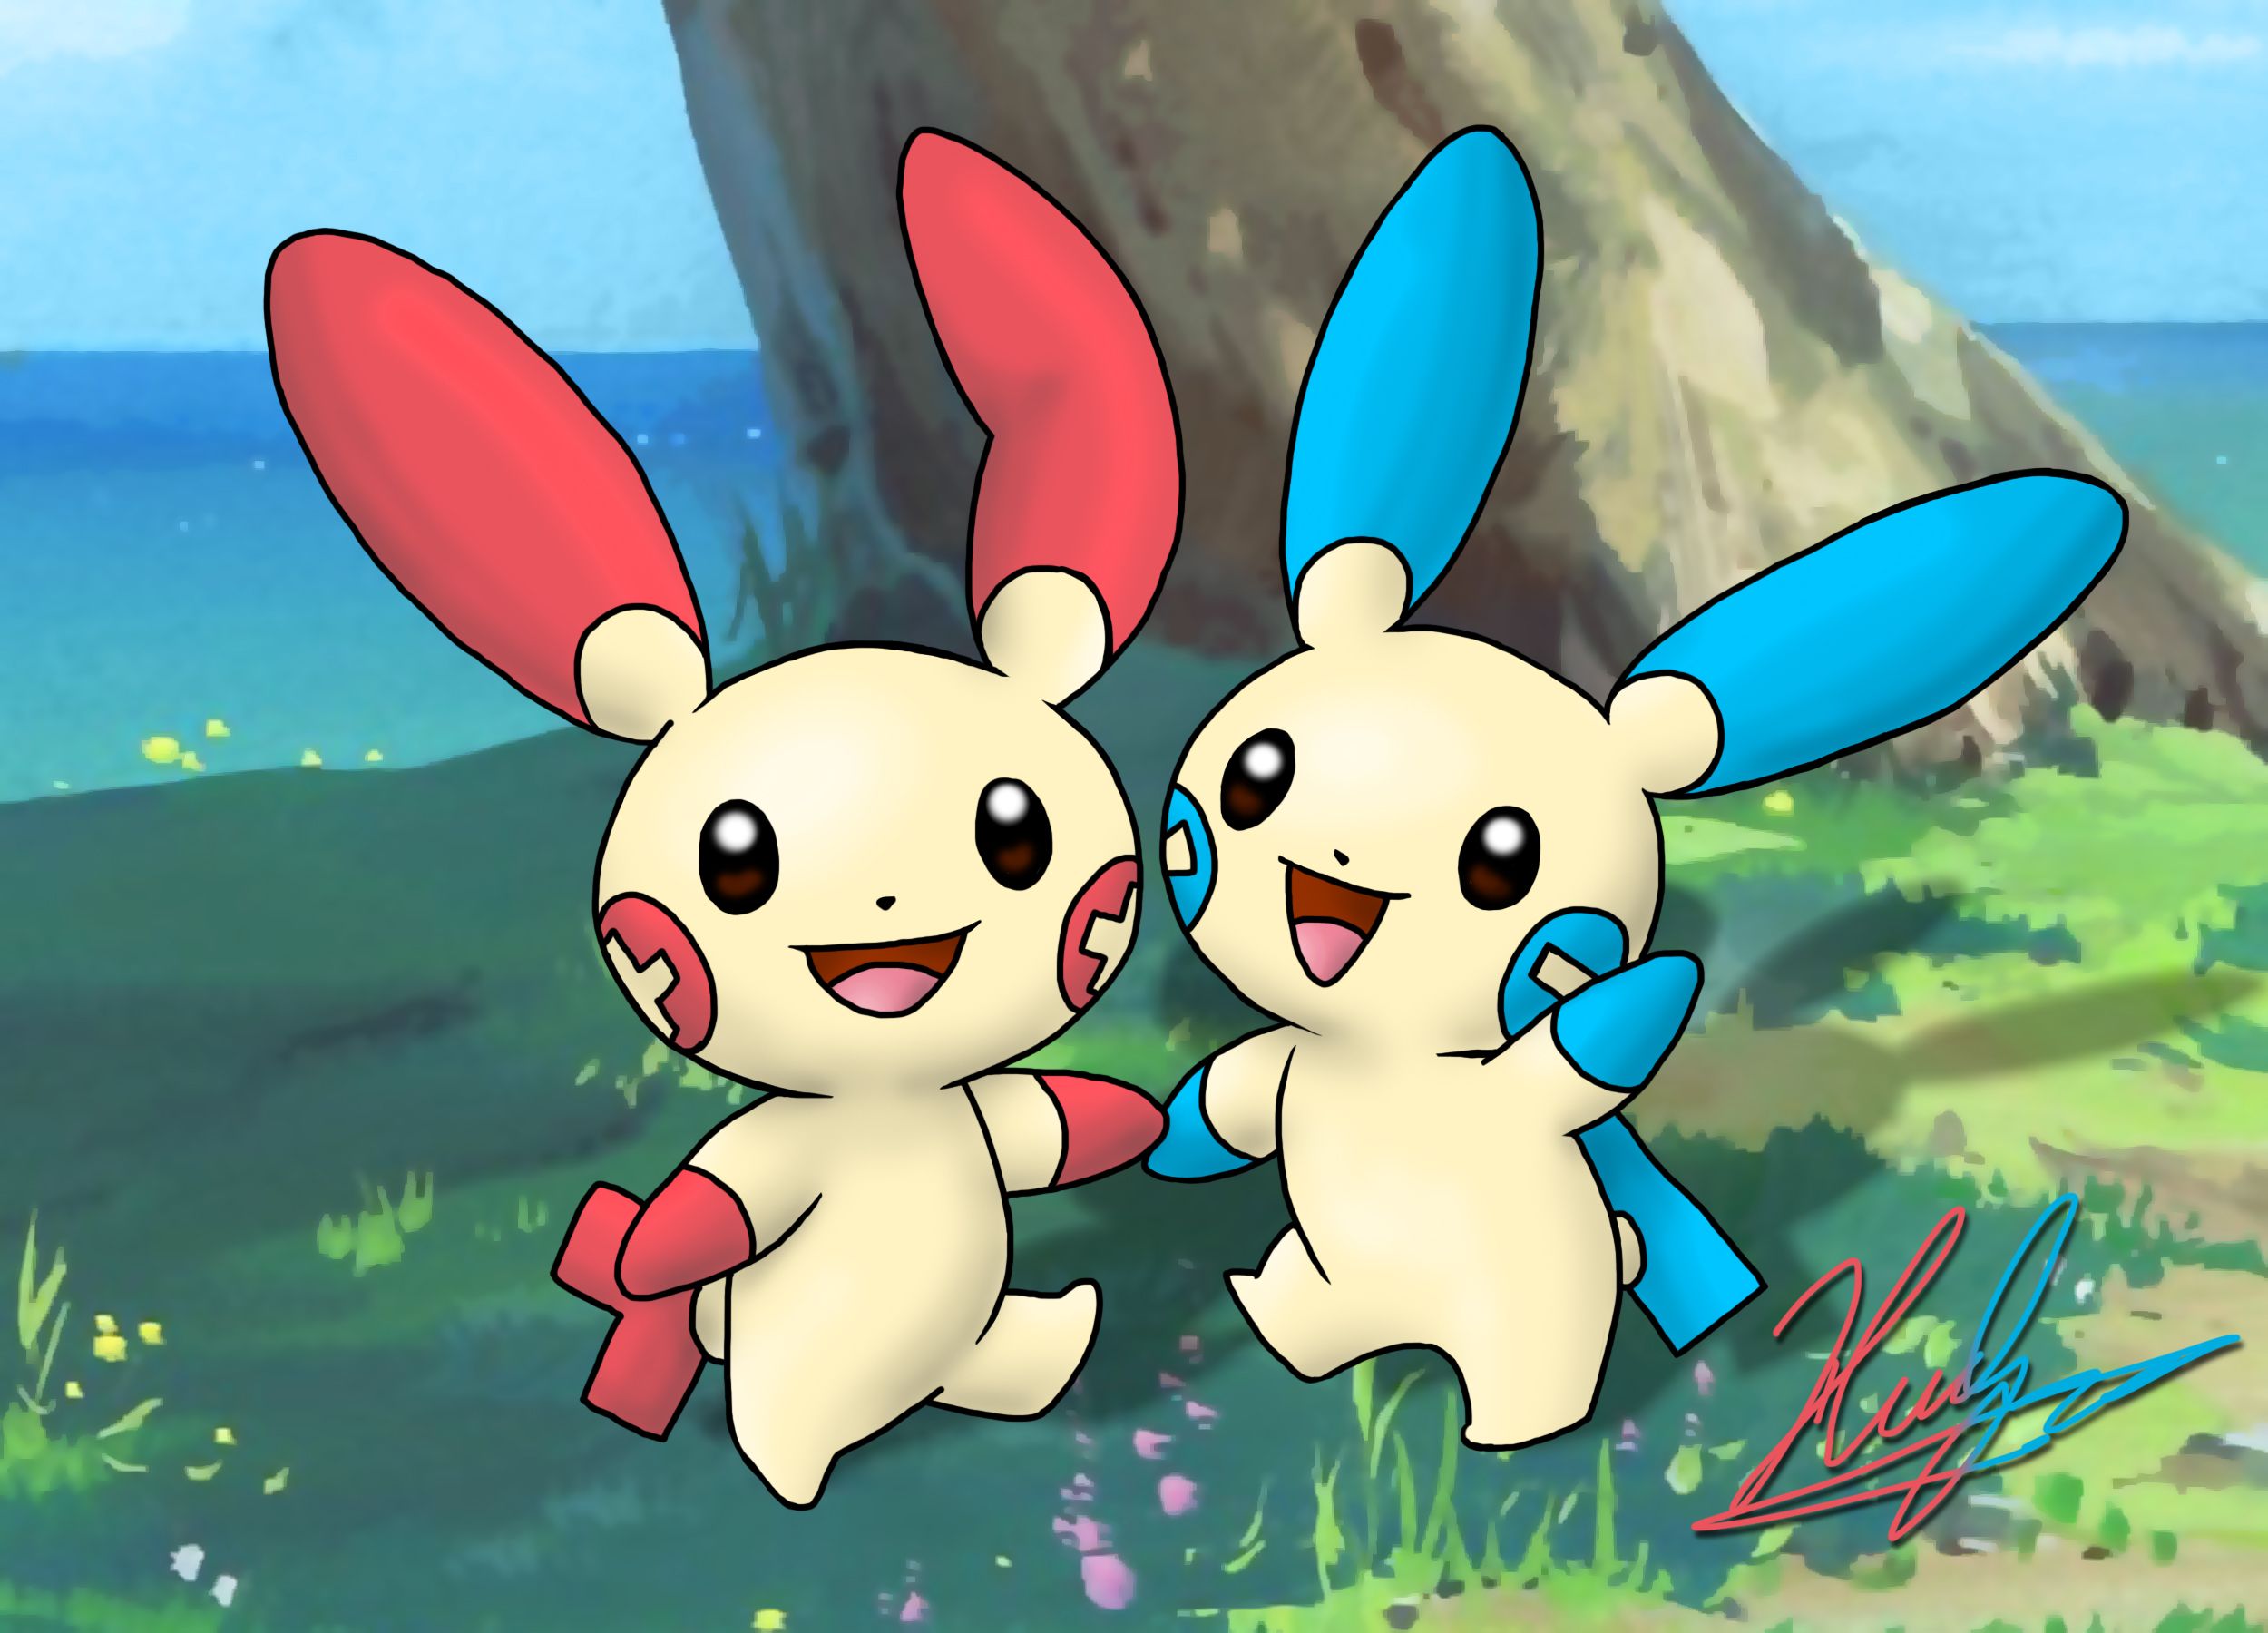 311-312 - Plusle and Minun by neoyurin on DeviantArt.